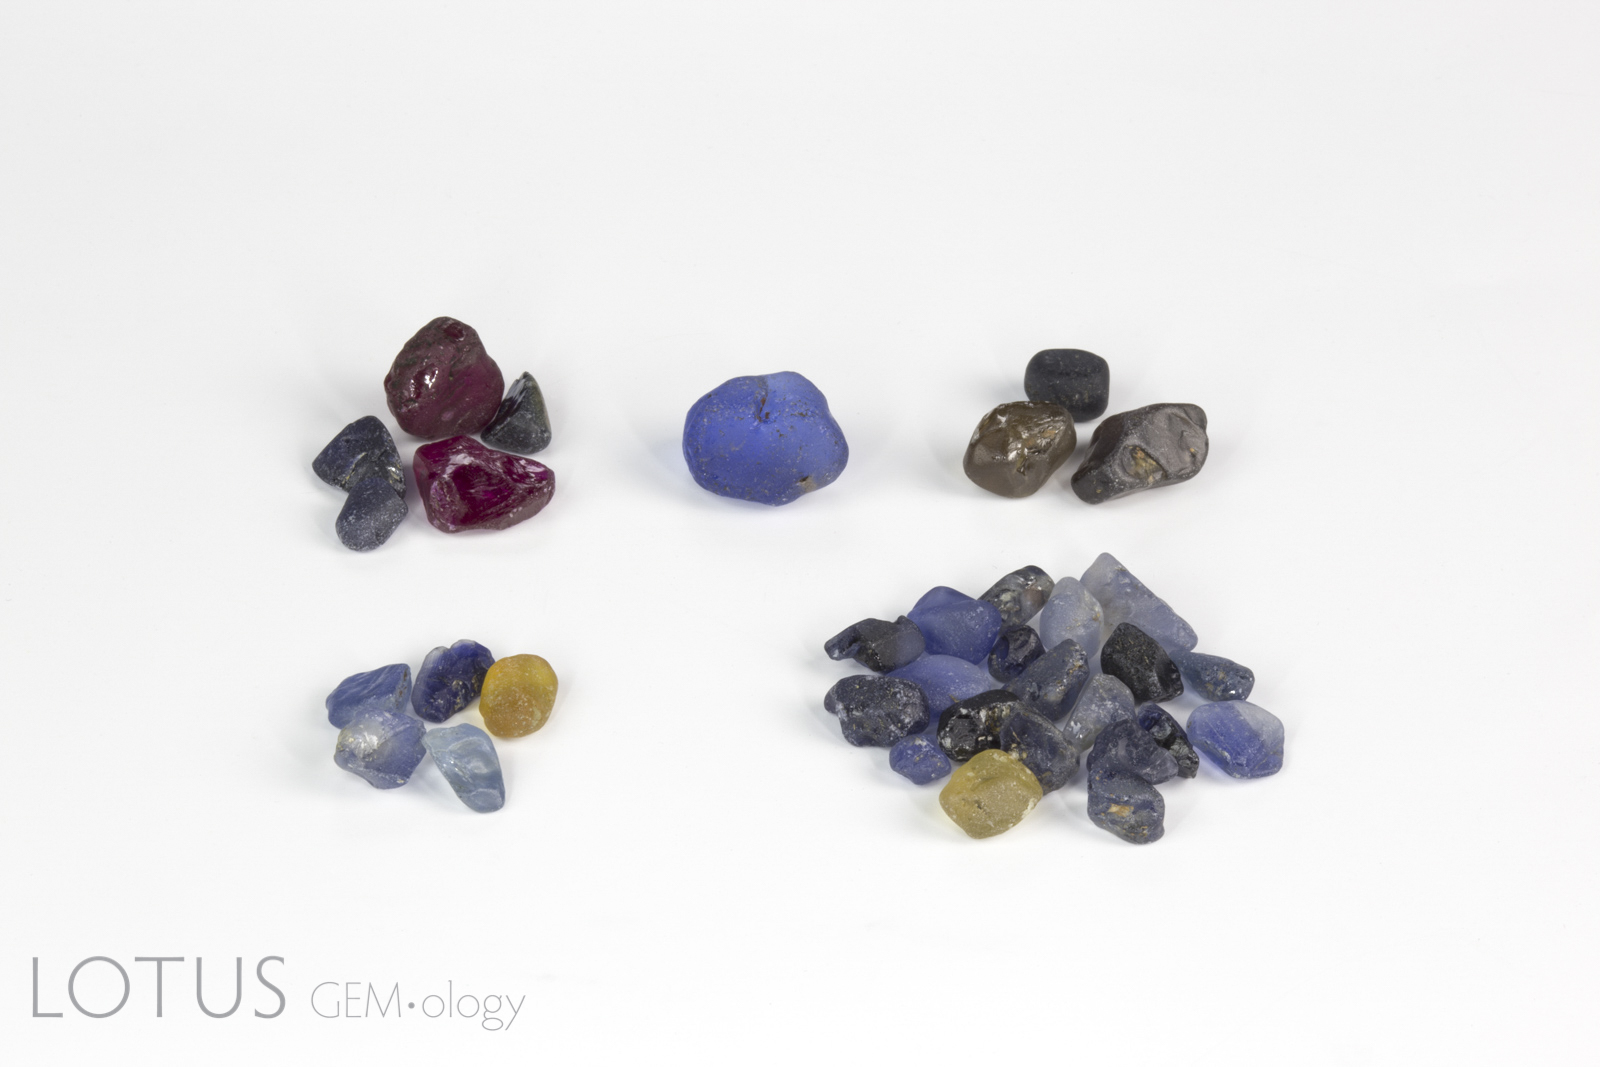 Rough gem samples purchased at Colorline’s Ilakaka office (clockwise from top left): Verneuil synthetic corundum, blue glass, zircon and spinel, coated natural sapphire; natural untreated blue and yellow sapphire. Note that these were purchased just to get a snapshot of what was in the market, even though we knew many were not what they were represented as. Photo: Wimon Manorotkul. 